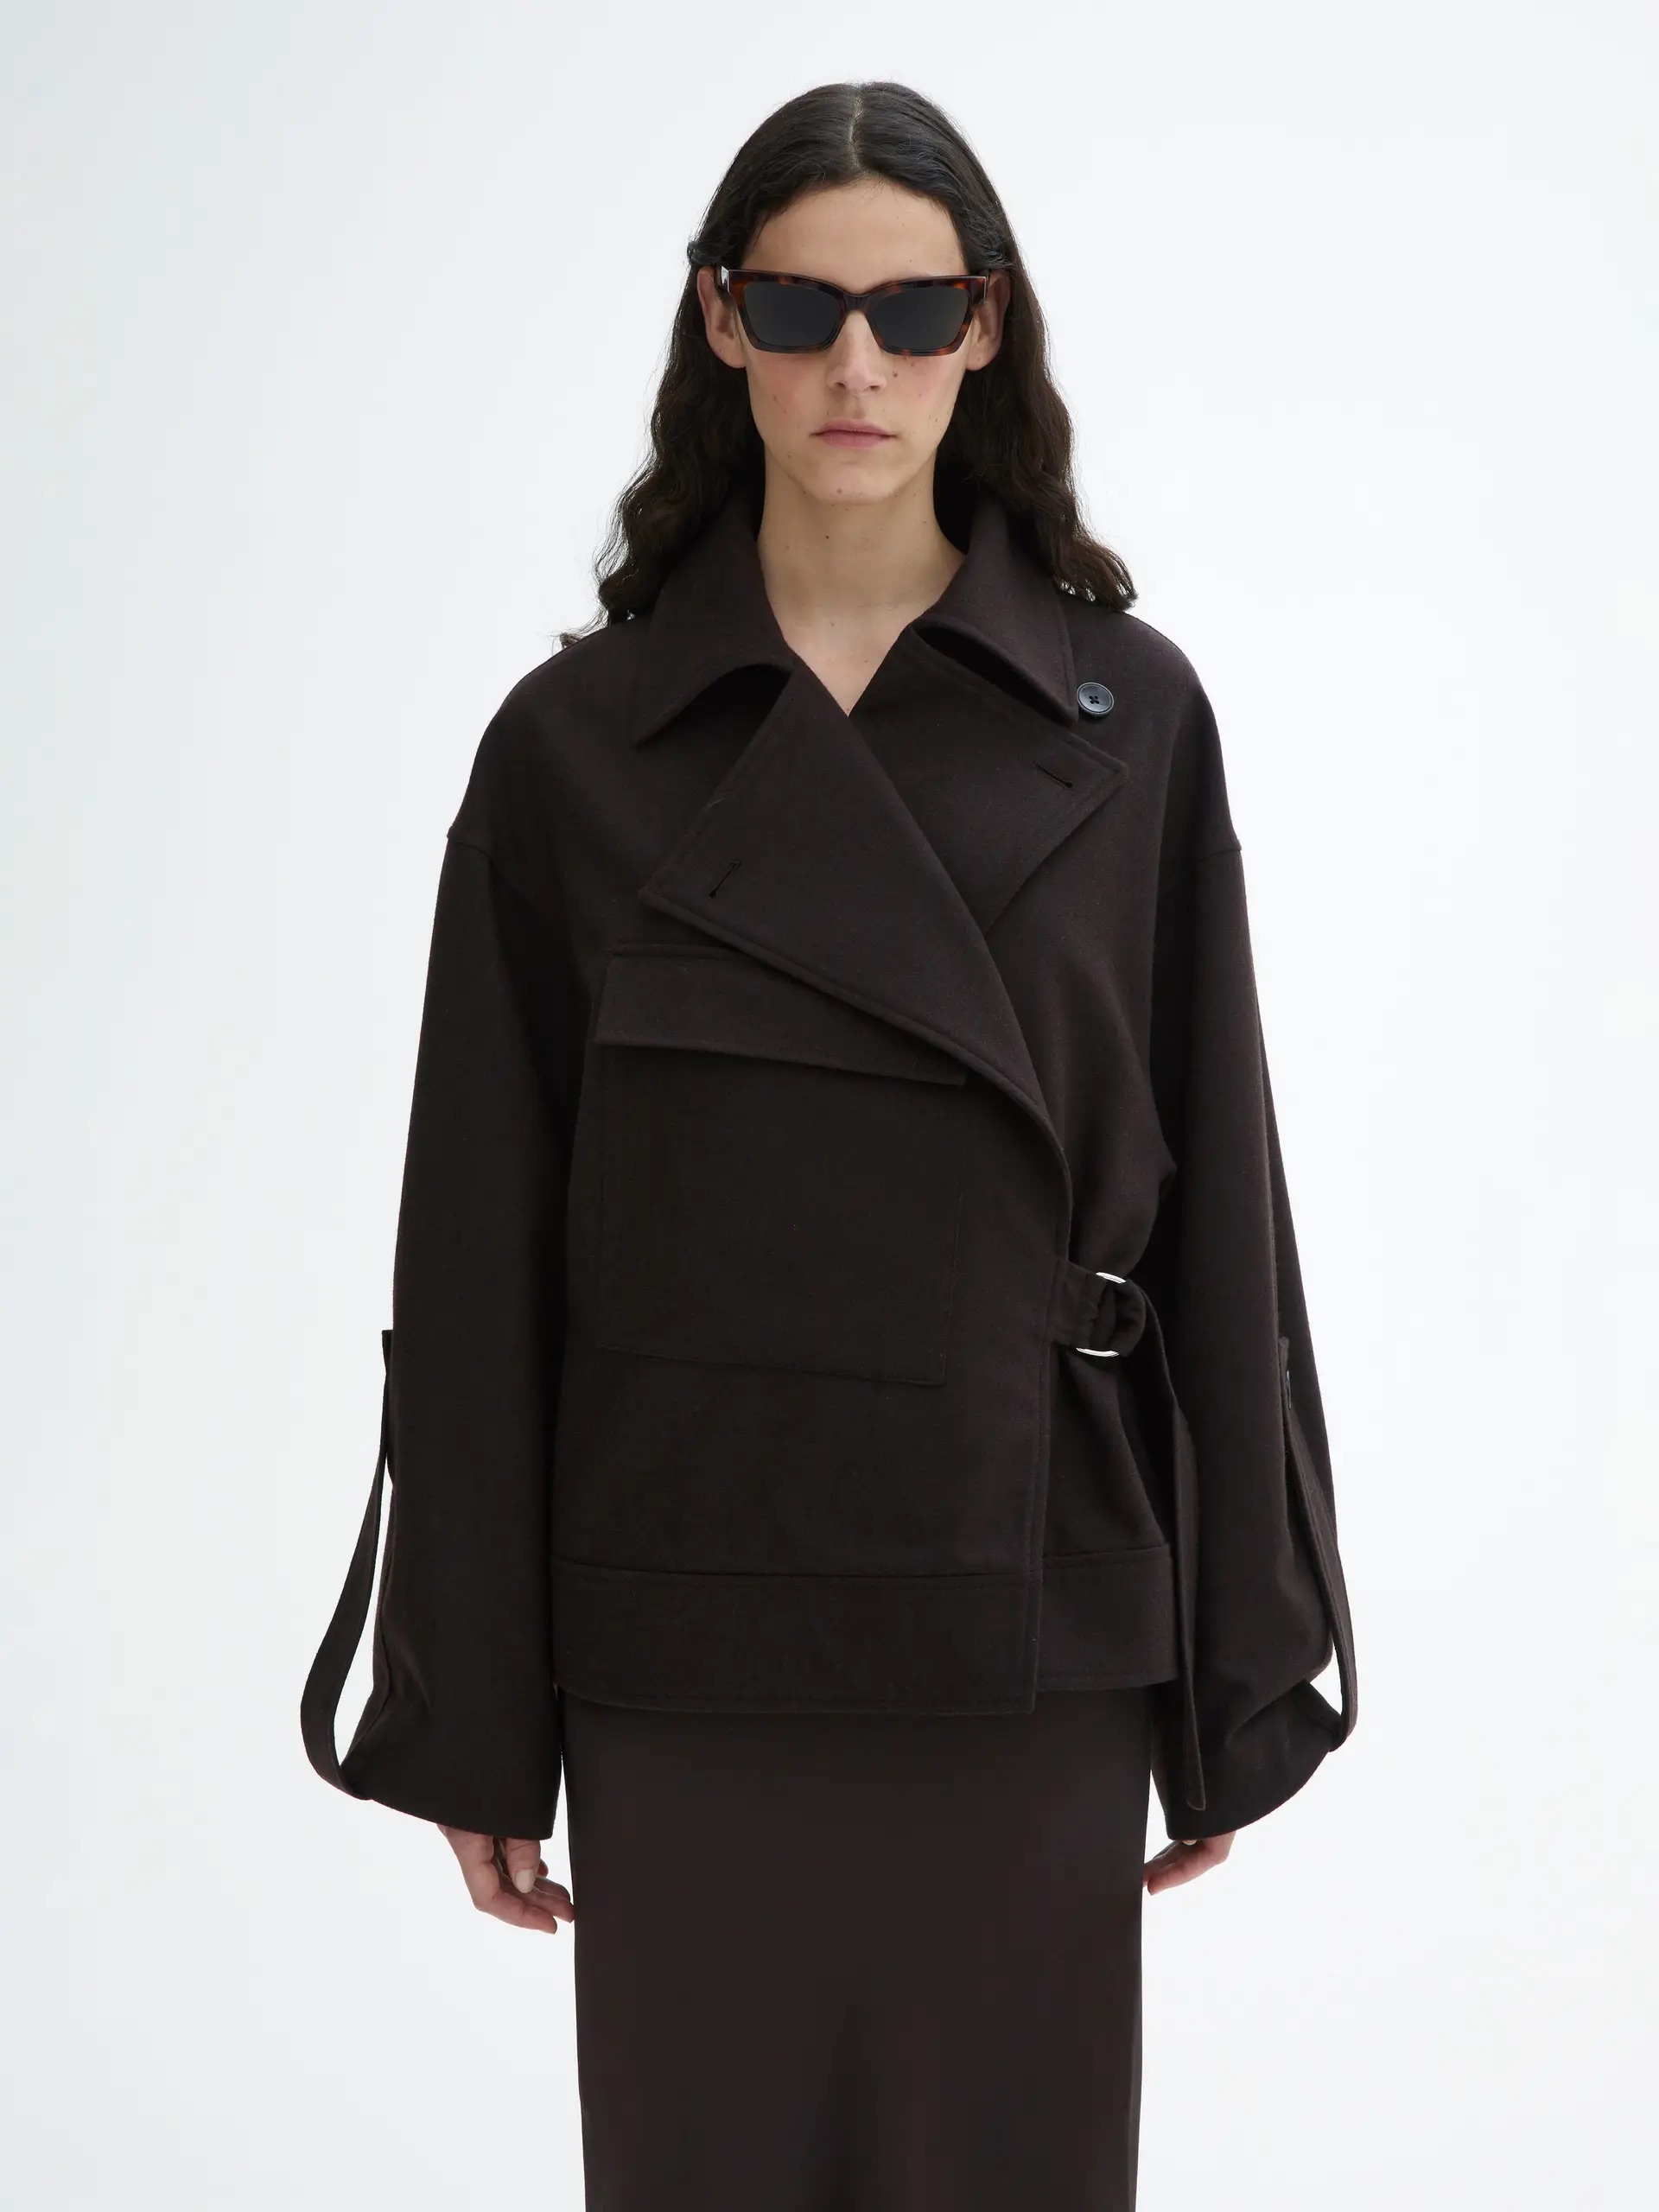 House of Dagmar Coats Are the Chicest Choice for Winter | Who What Wear UK